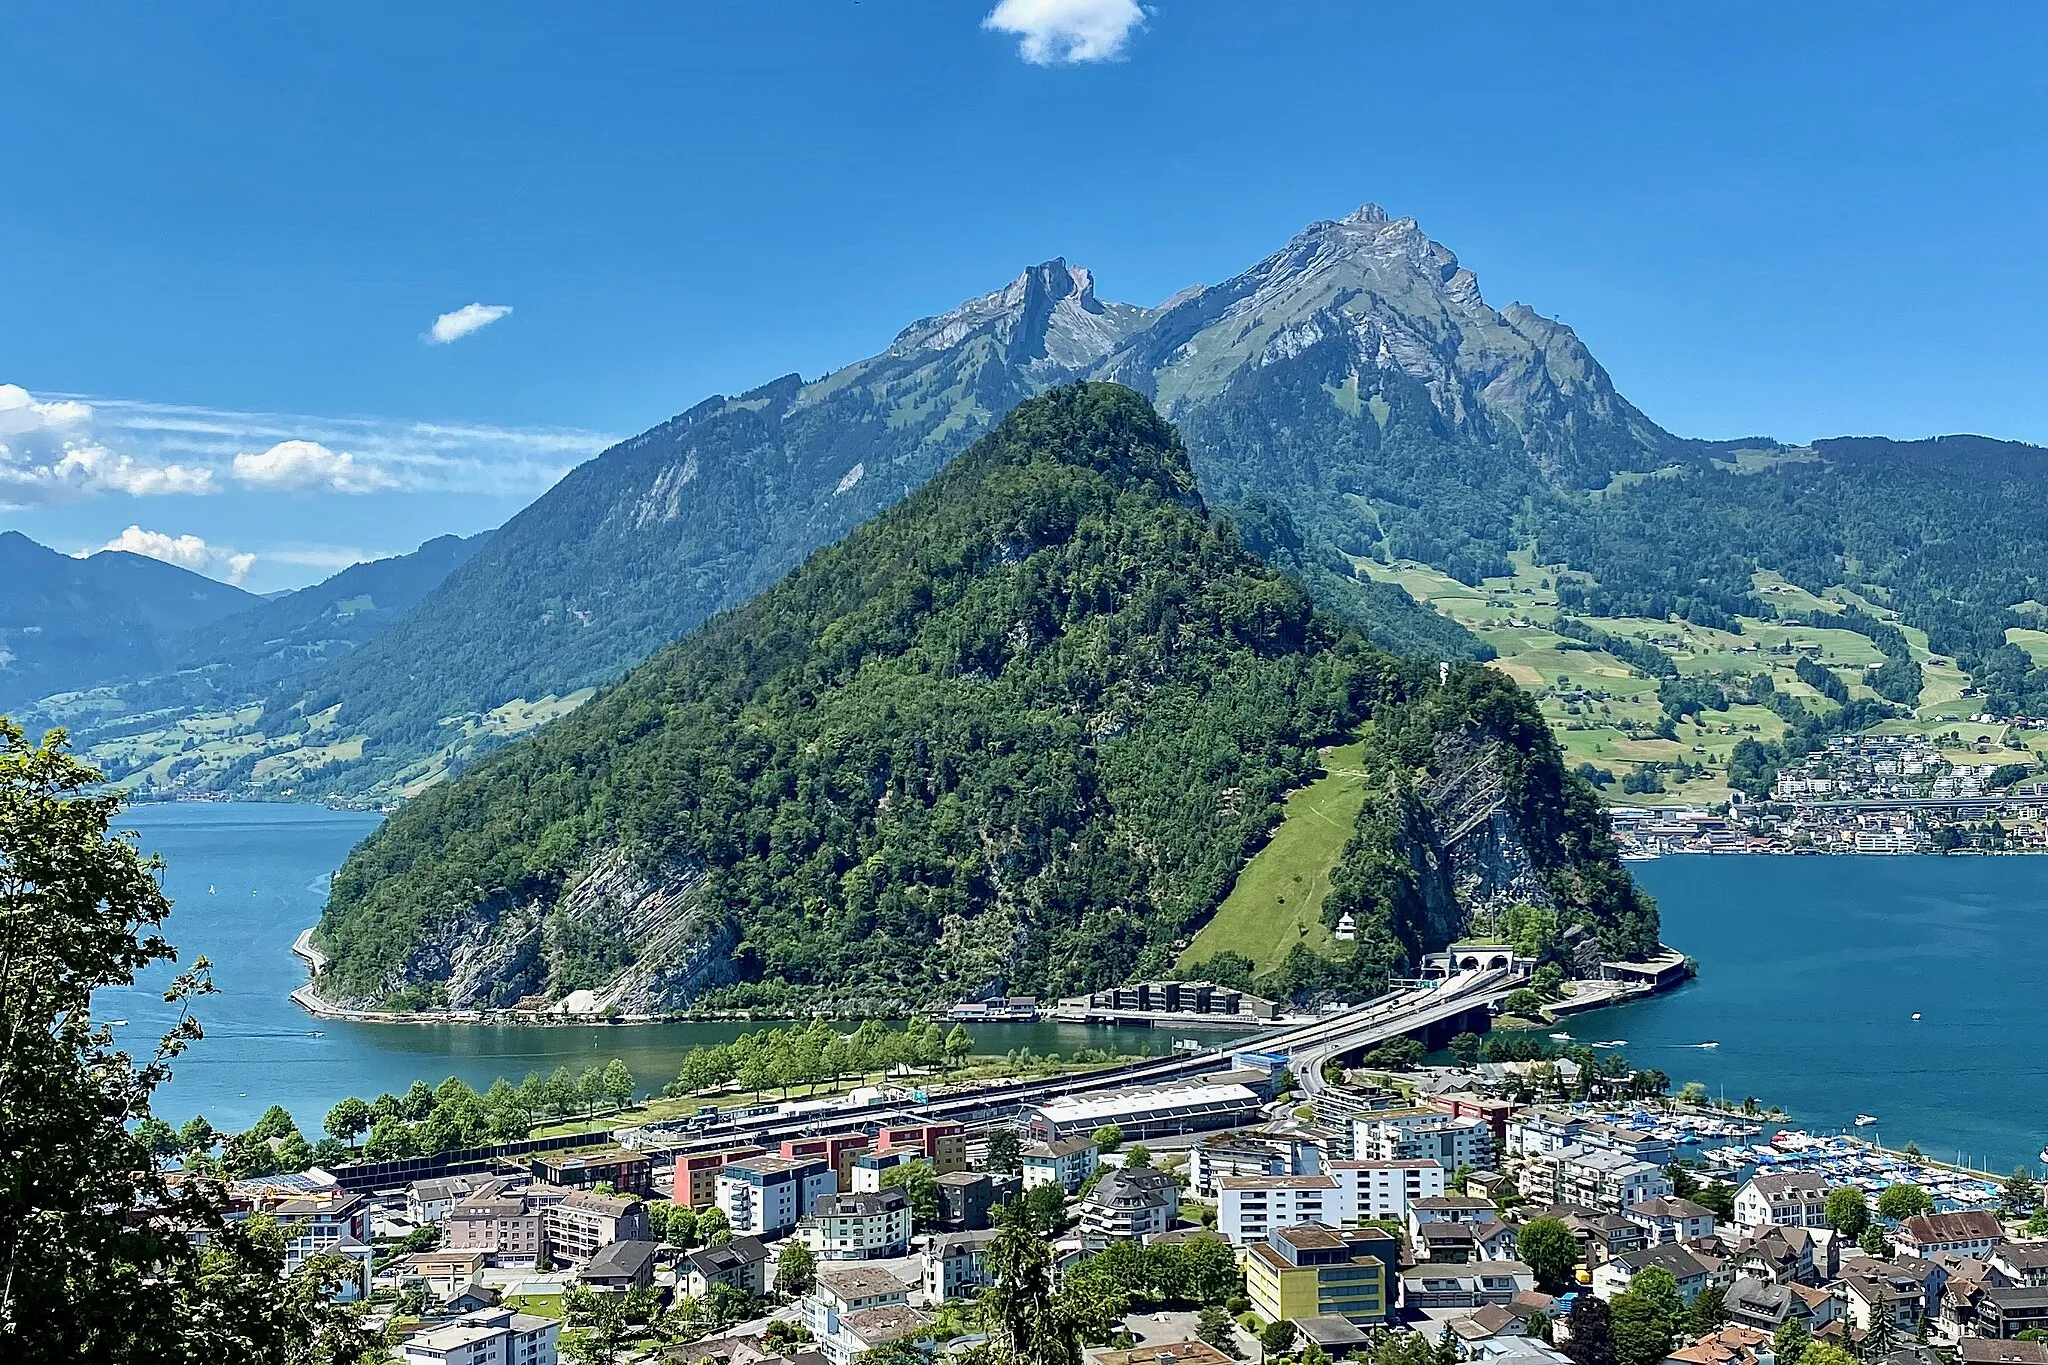 Photo showing: Lopper, the mountain with Stansstad in the foreground, and Pilatus/Hergiswil in the background. On the right side of Looper, A2 motorway entering the portal of Kirchenwaldtunnel at Acheregg